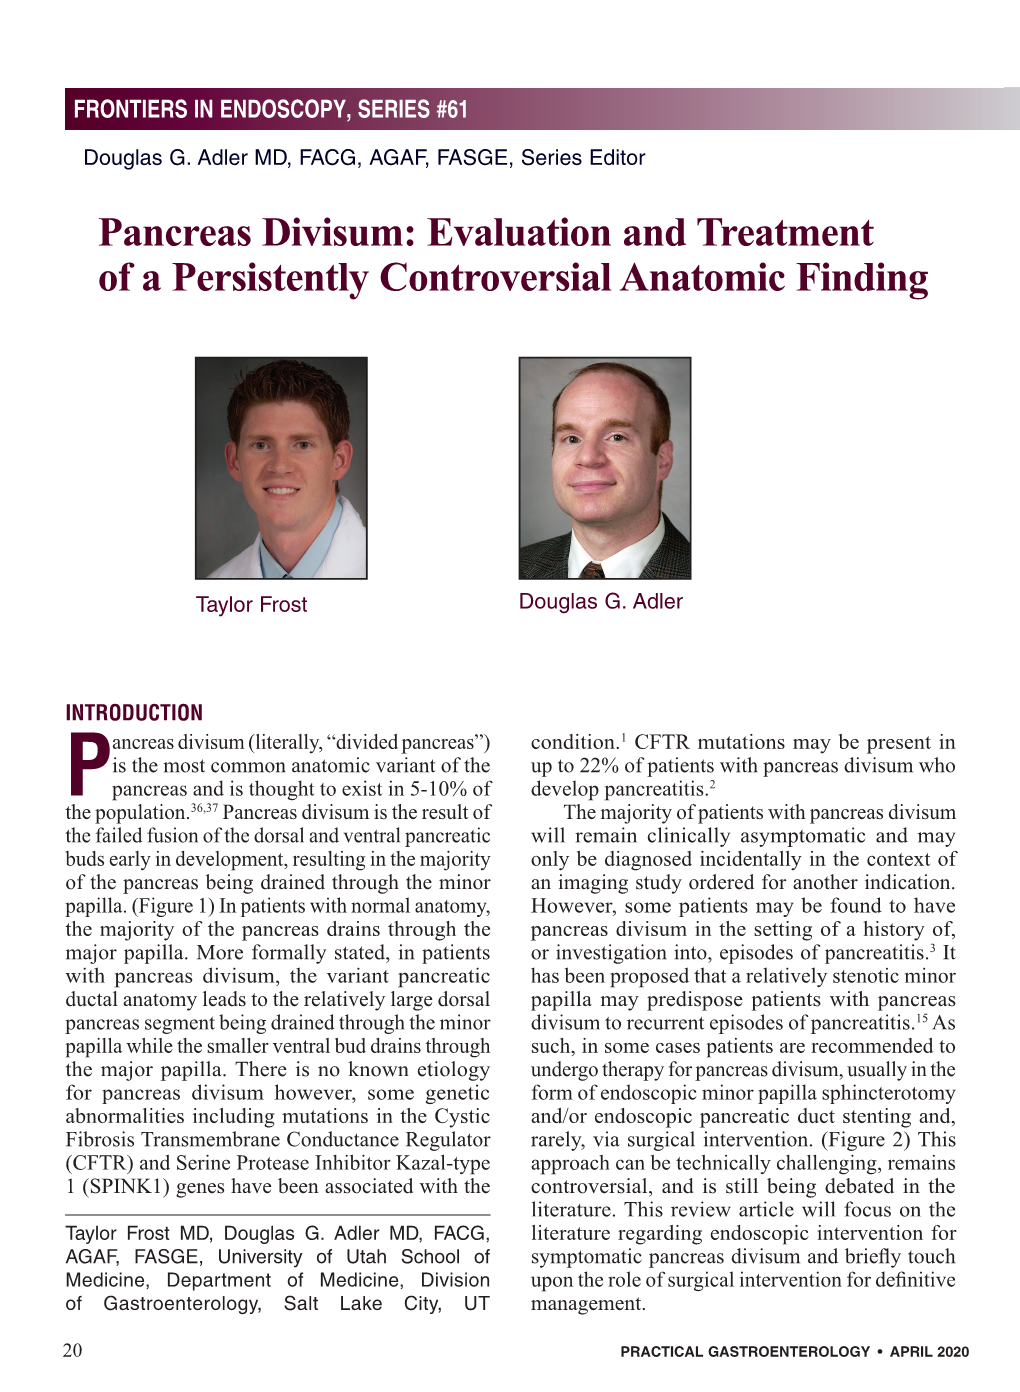 Pancreas Divisum: Evaluation and Treatment of a Persistently Controversial Anatomic Finding